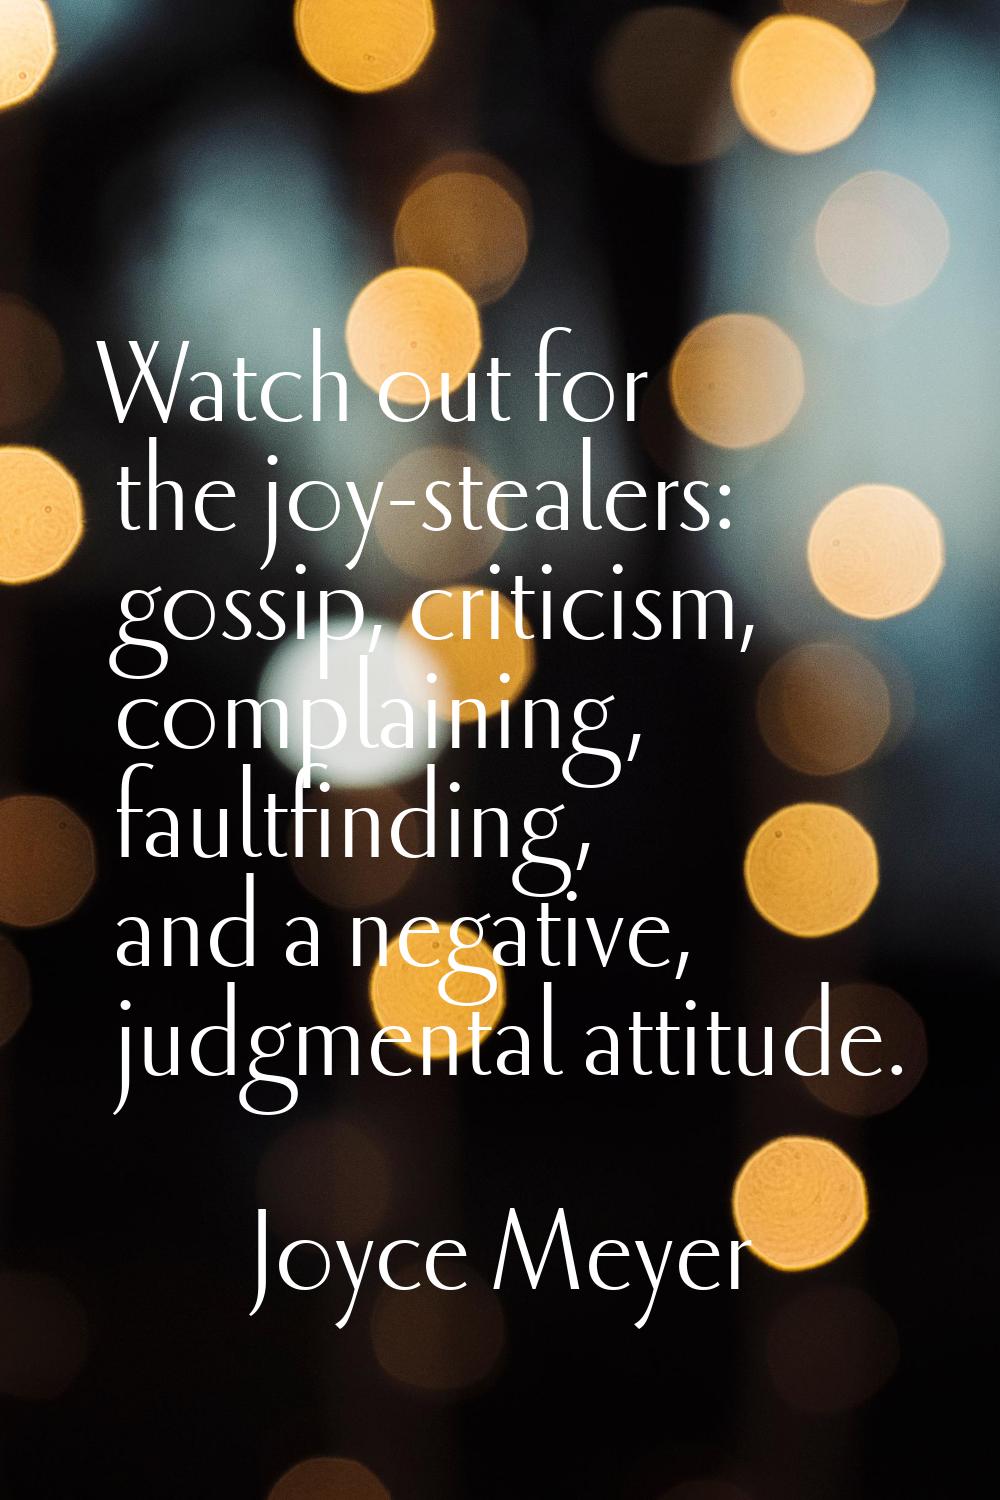 Watch out for the joy-stealers: gossip, criticism, complaining, faultfinding, and a negative, judgm